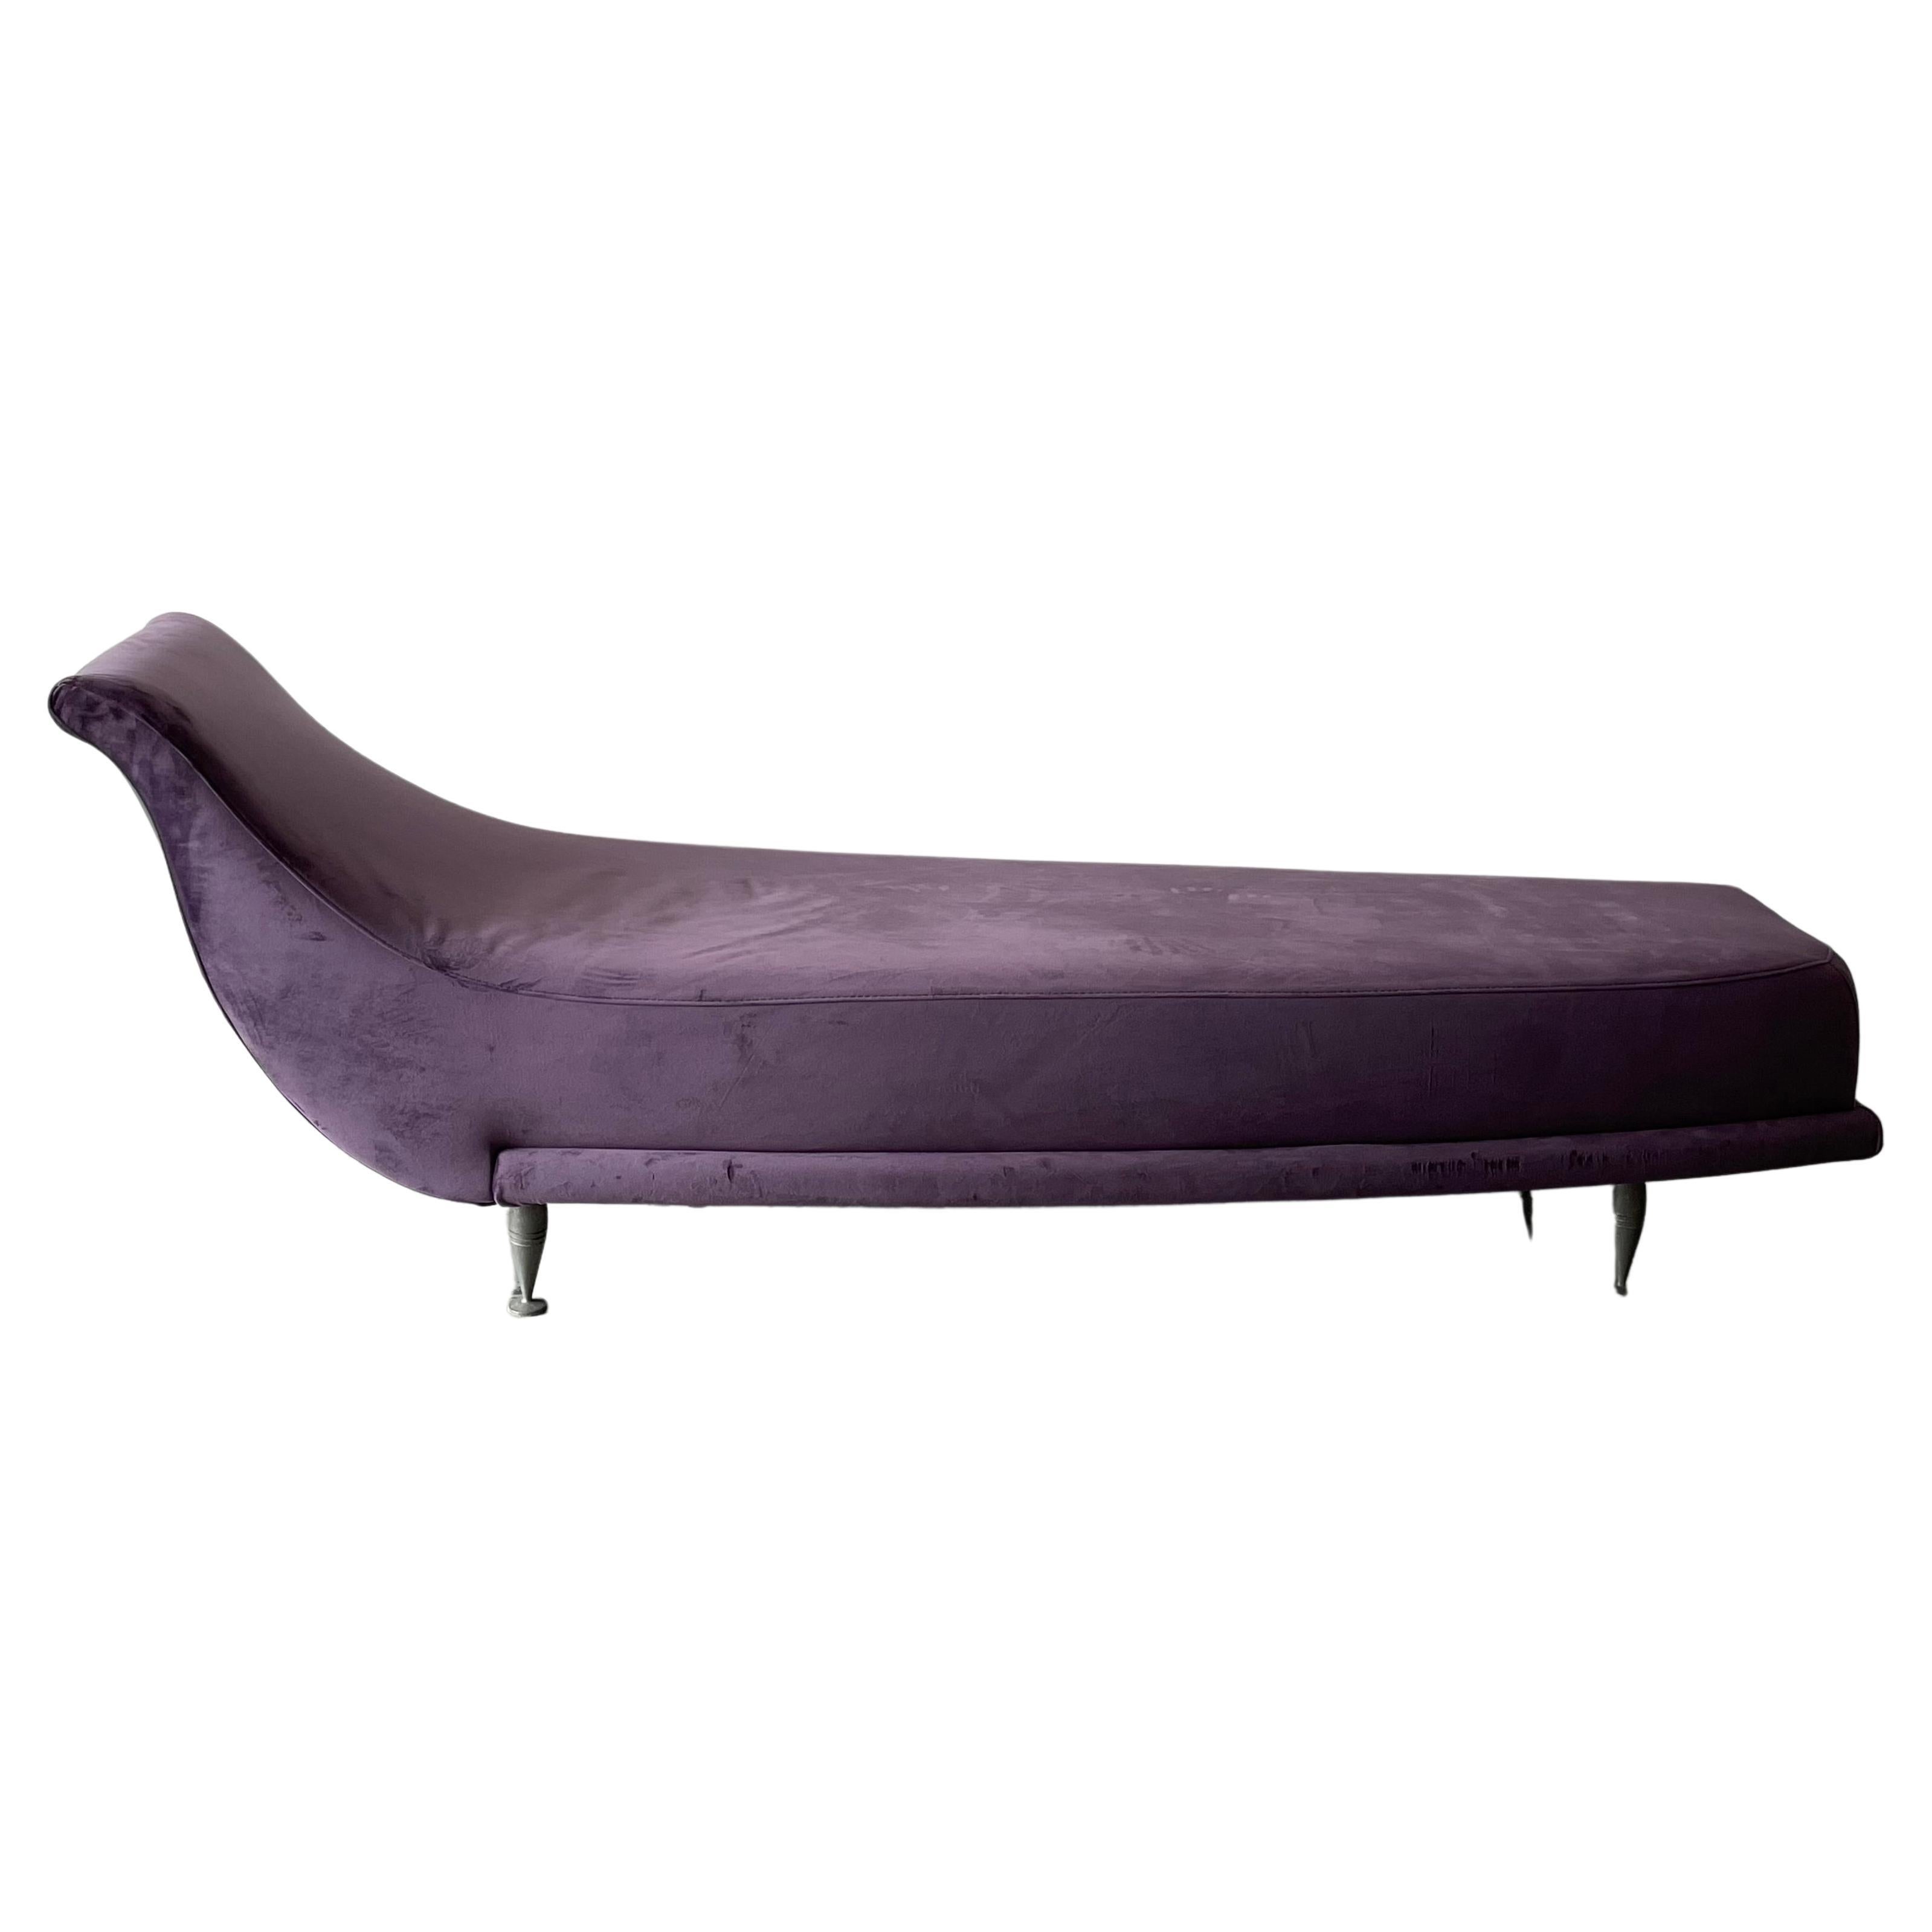 Chaise Longue by Massimo Iosa Ghini Postmodern for Moroso Italy